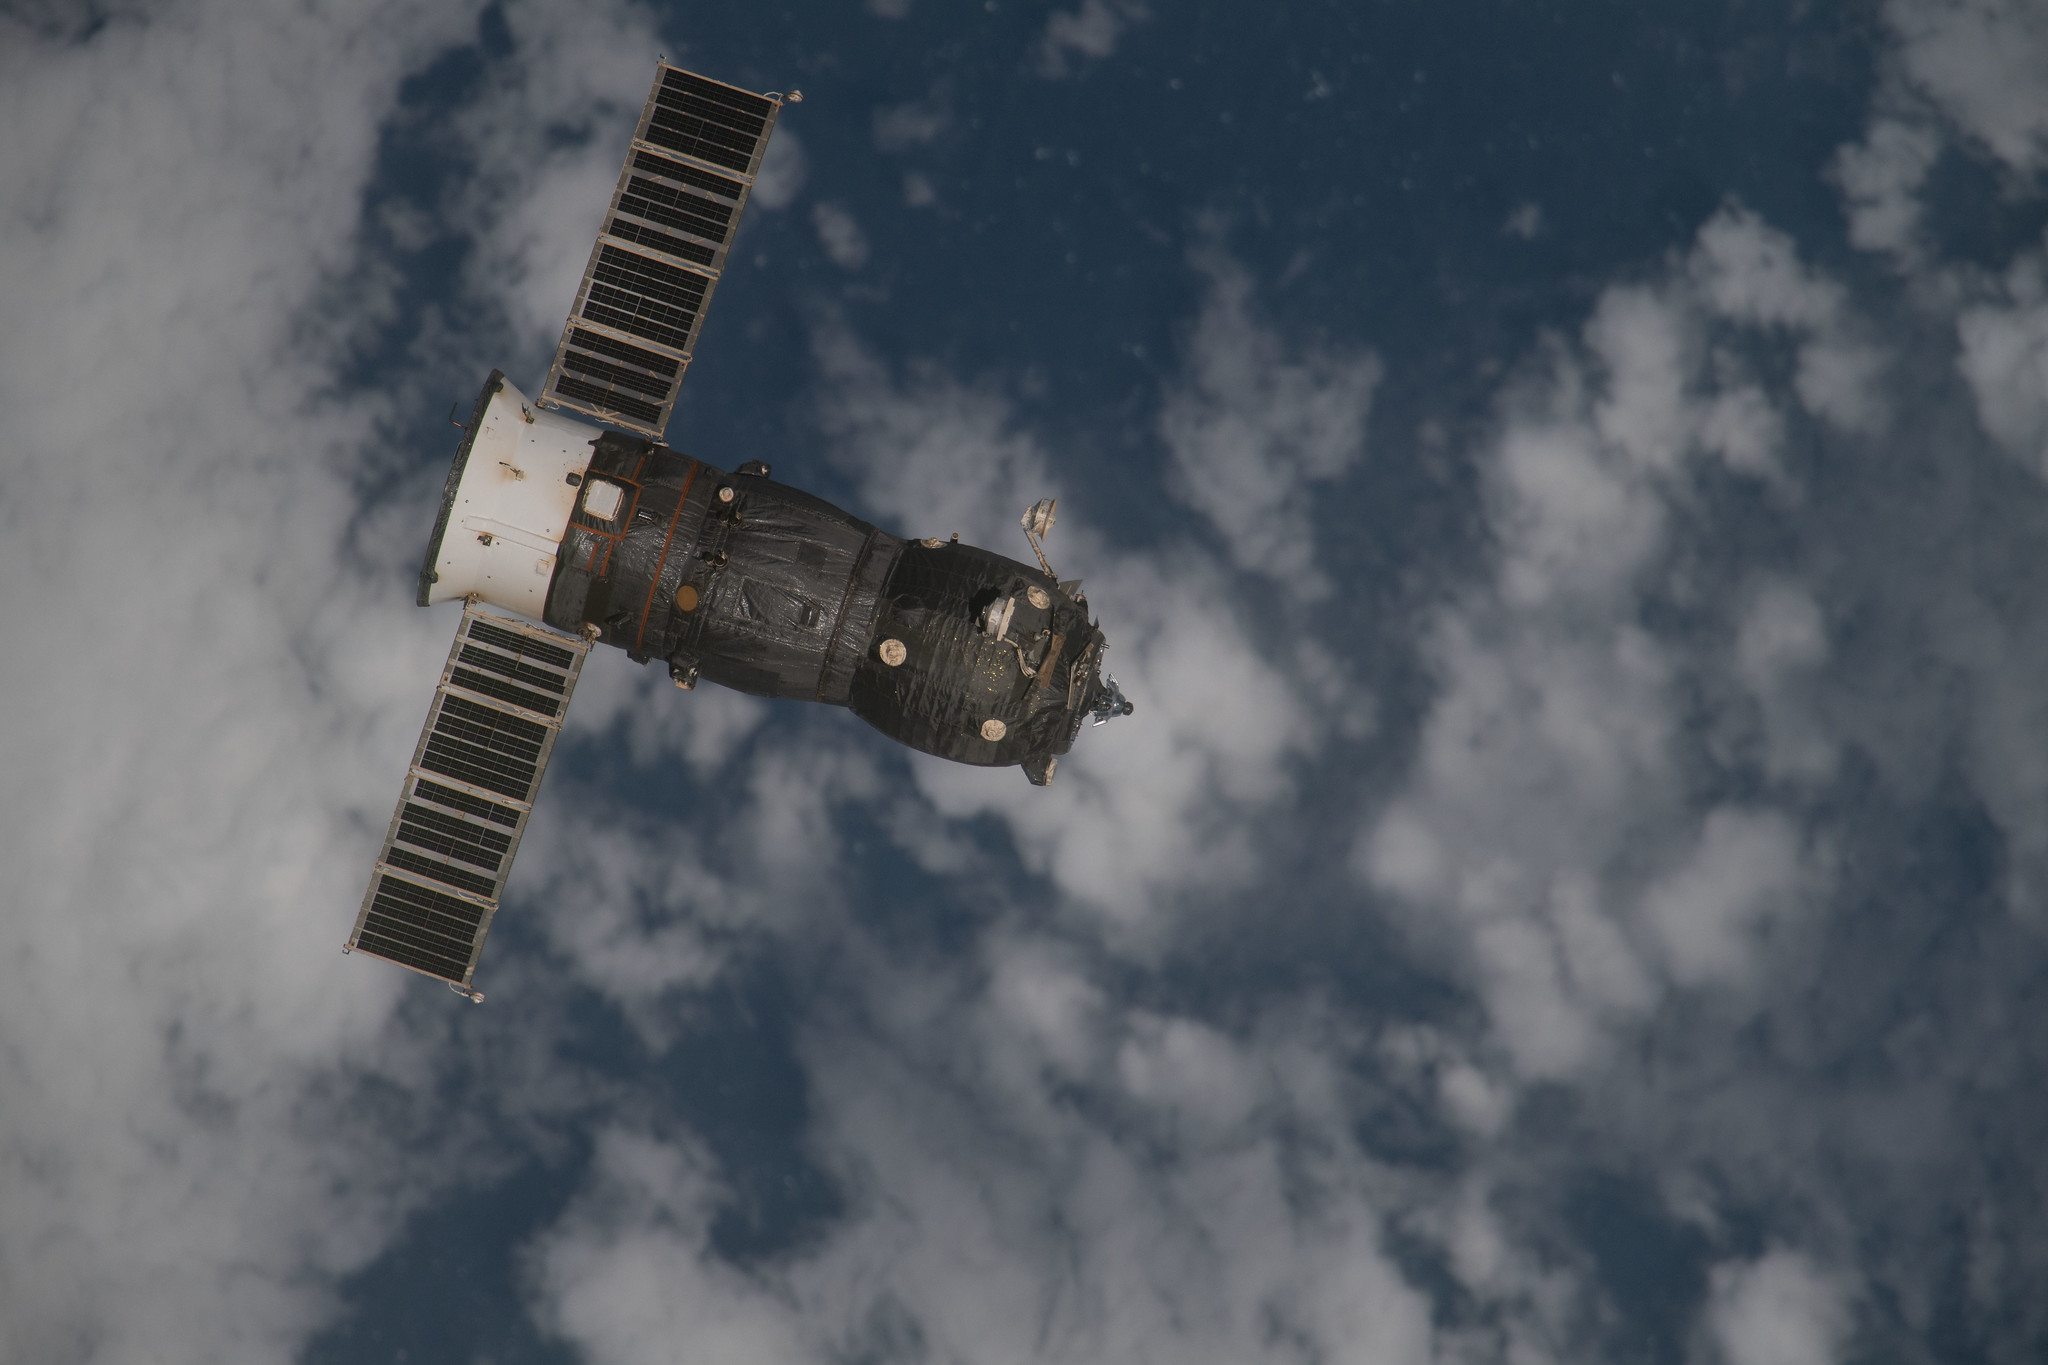 Russia's ISS Progress 75 cargo craft, seen departing from the International Space Station April 27, 2021 after undocking from the Zvezda service module's aft port, where it stayed for just over a year.